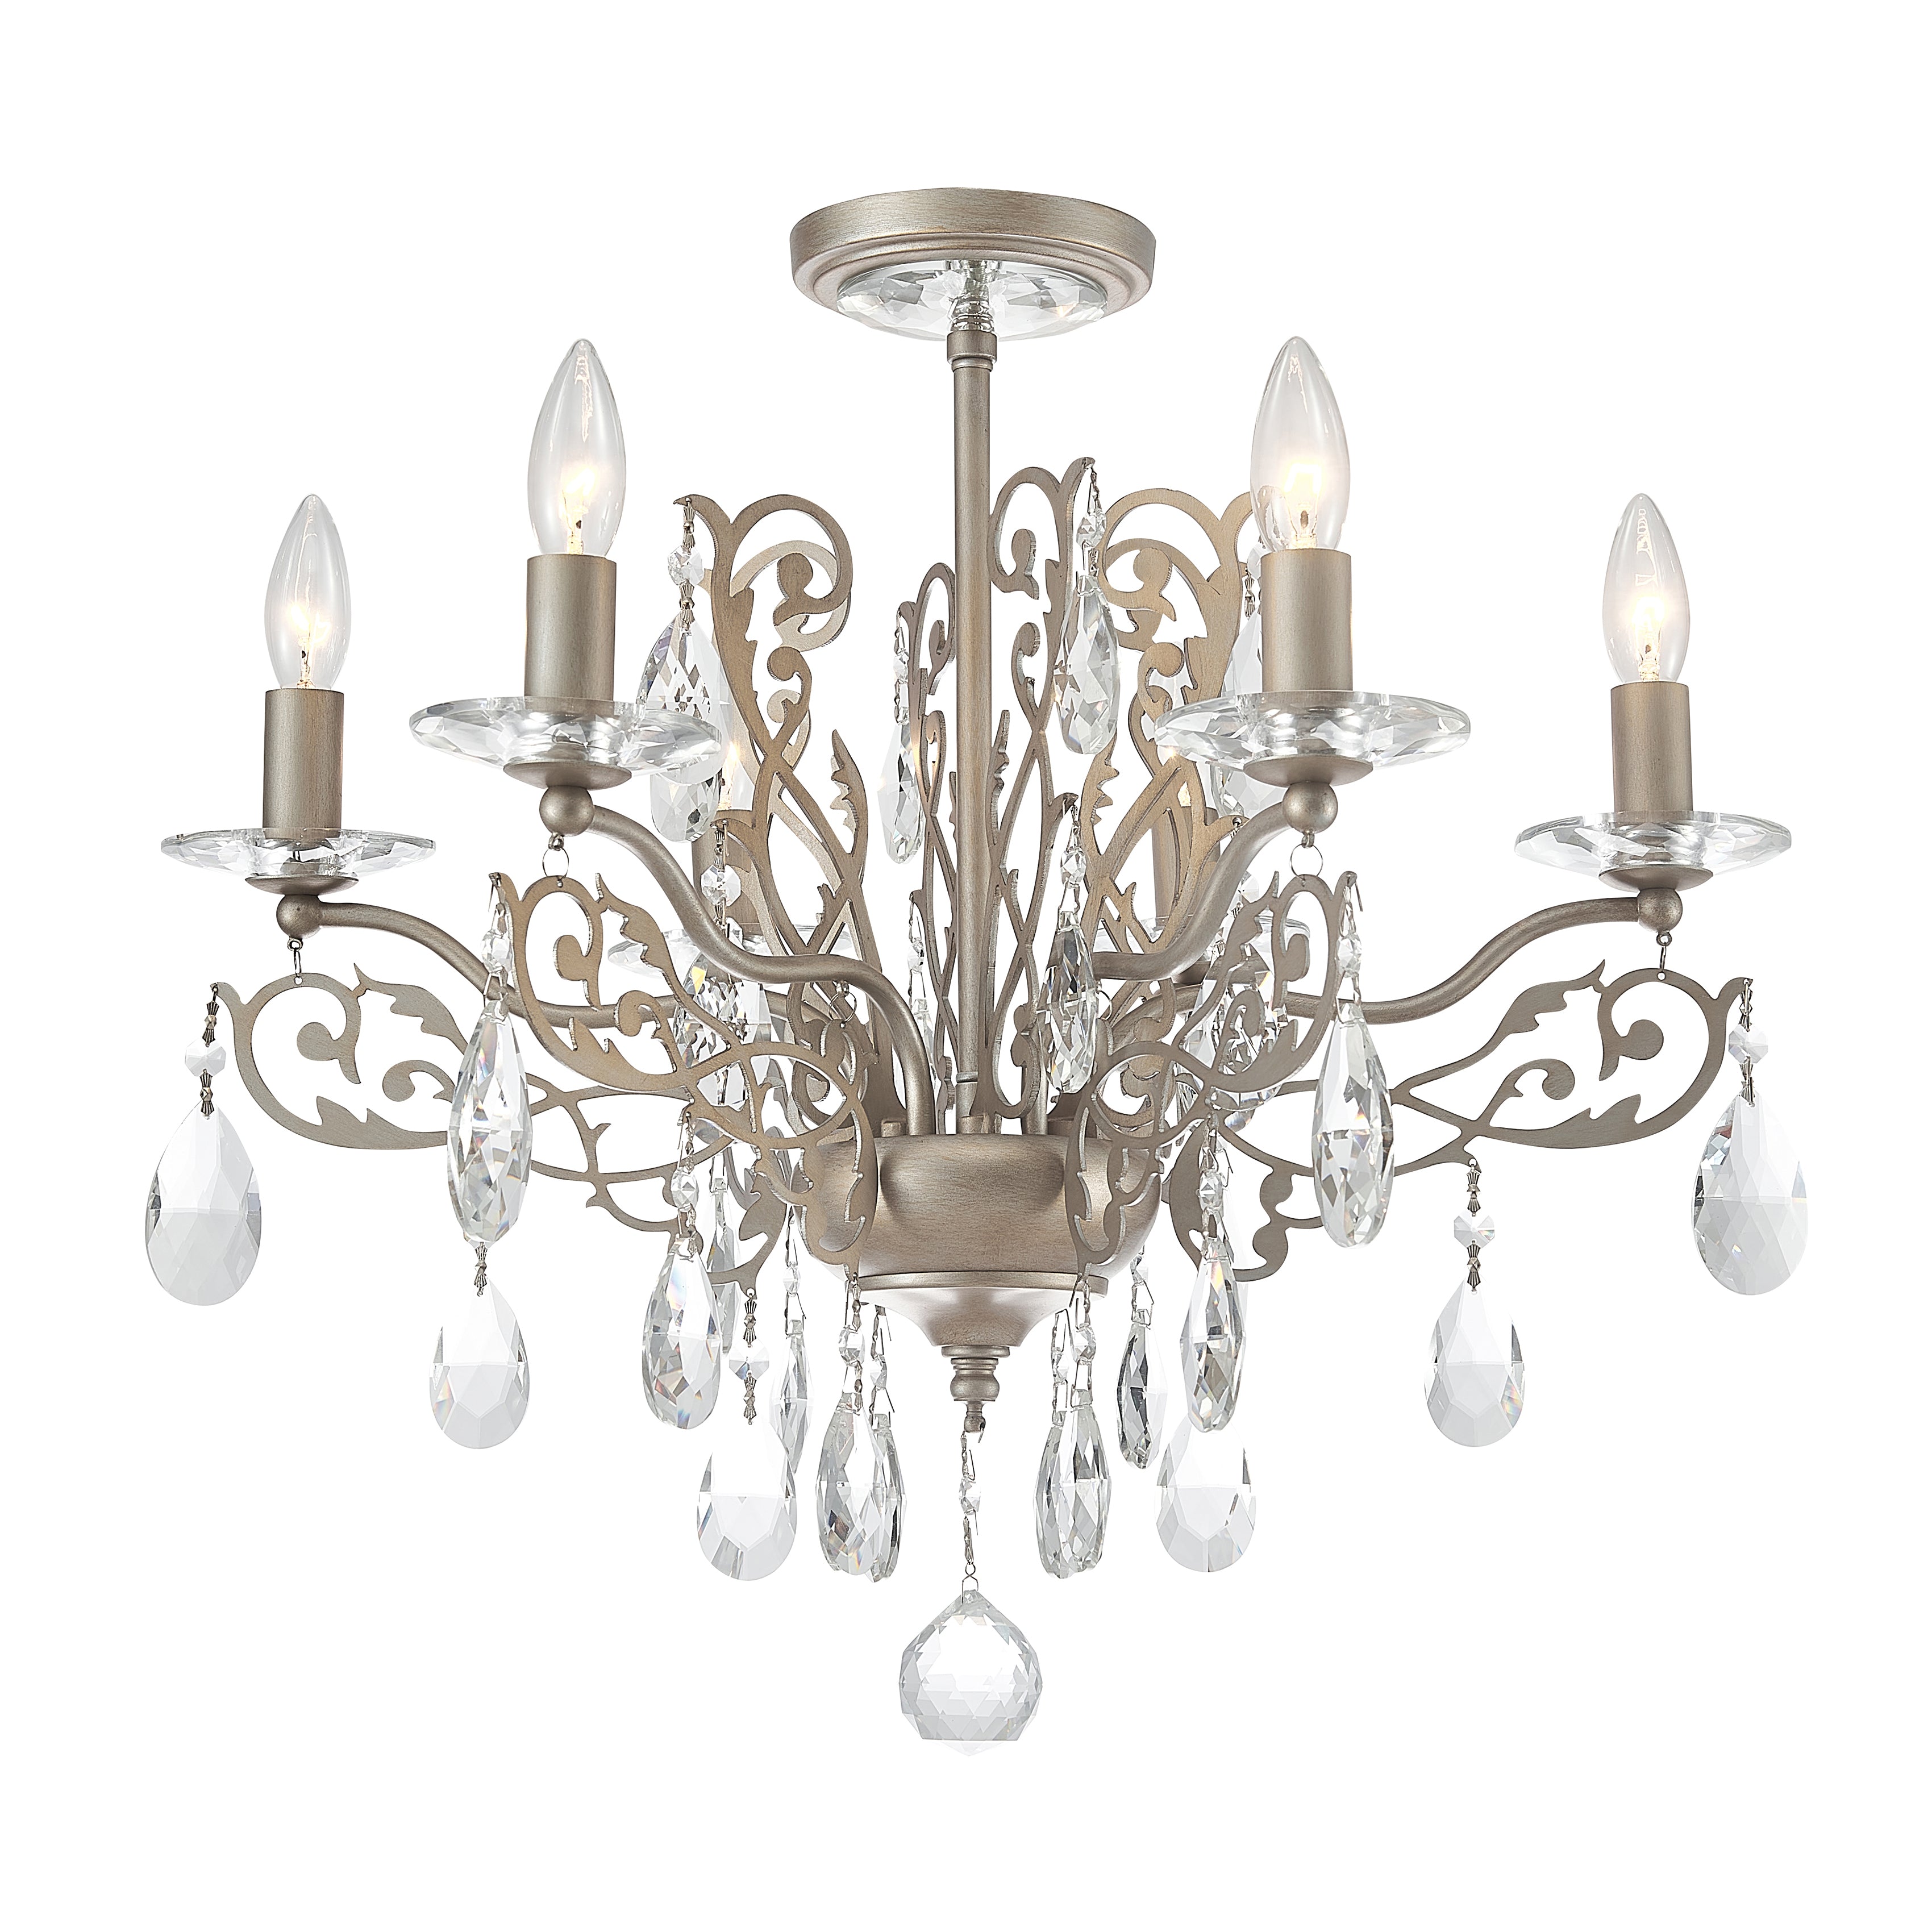 Easton Scroll French Country Crystal Chandelier - Italian Concept - Size